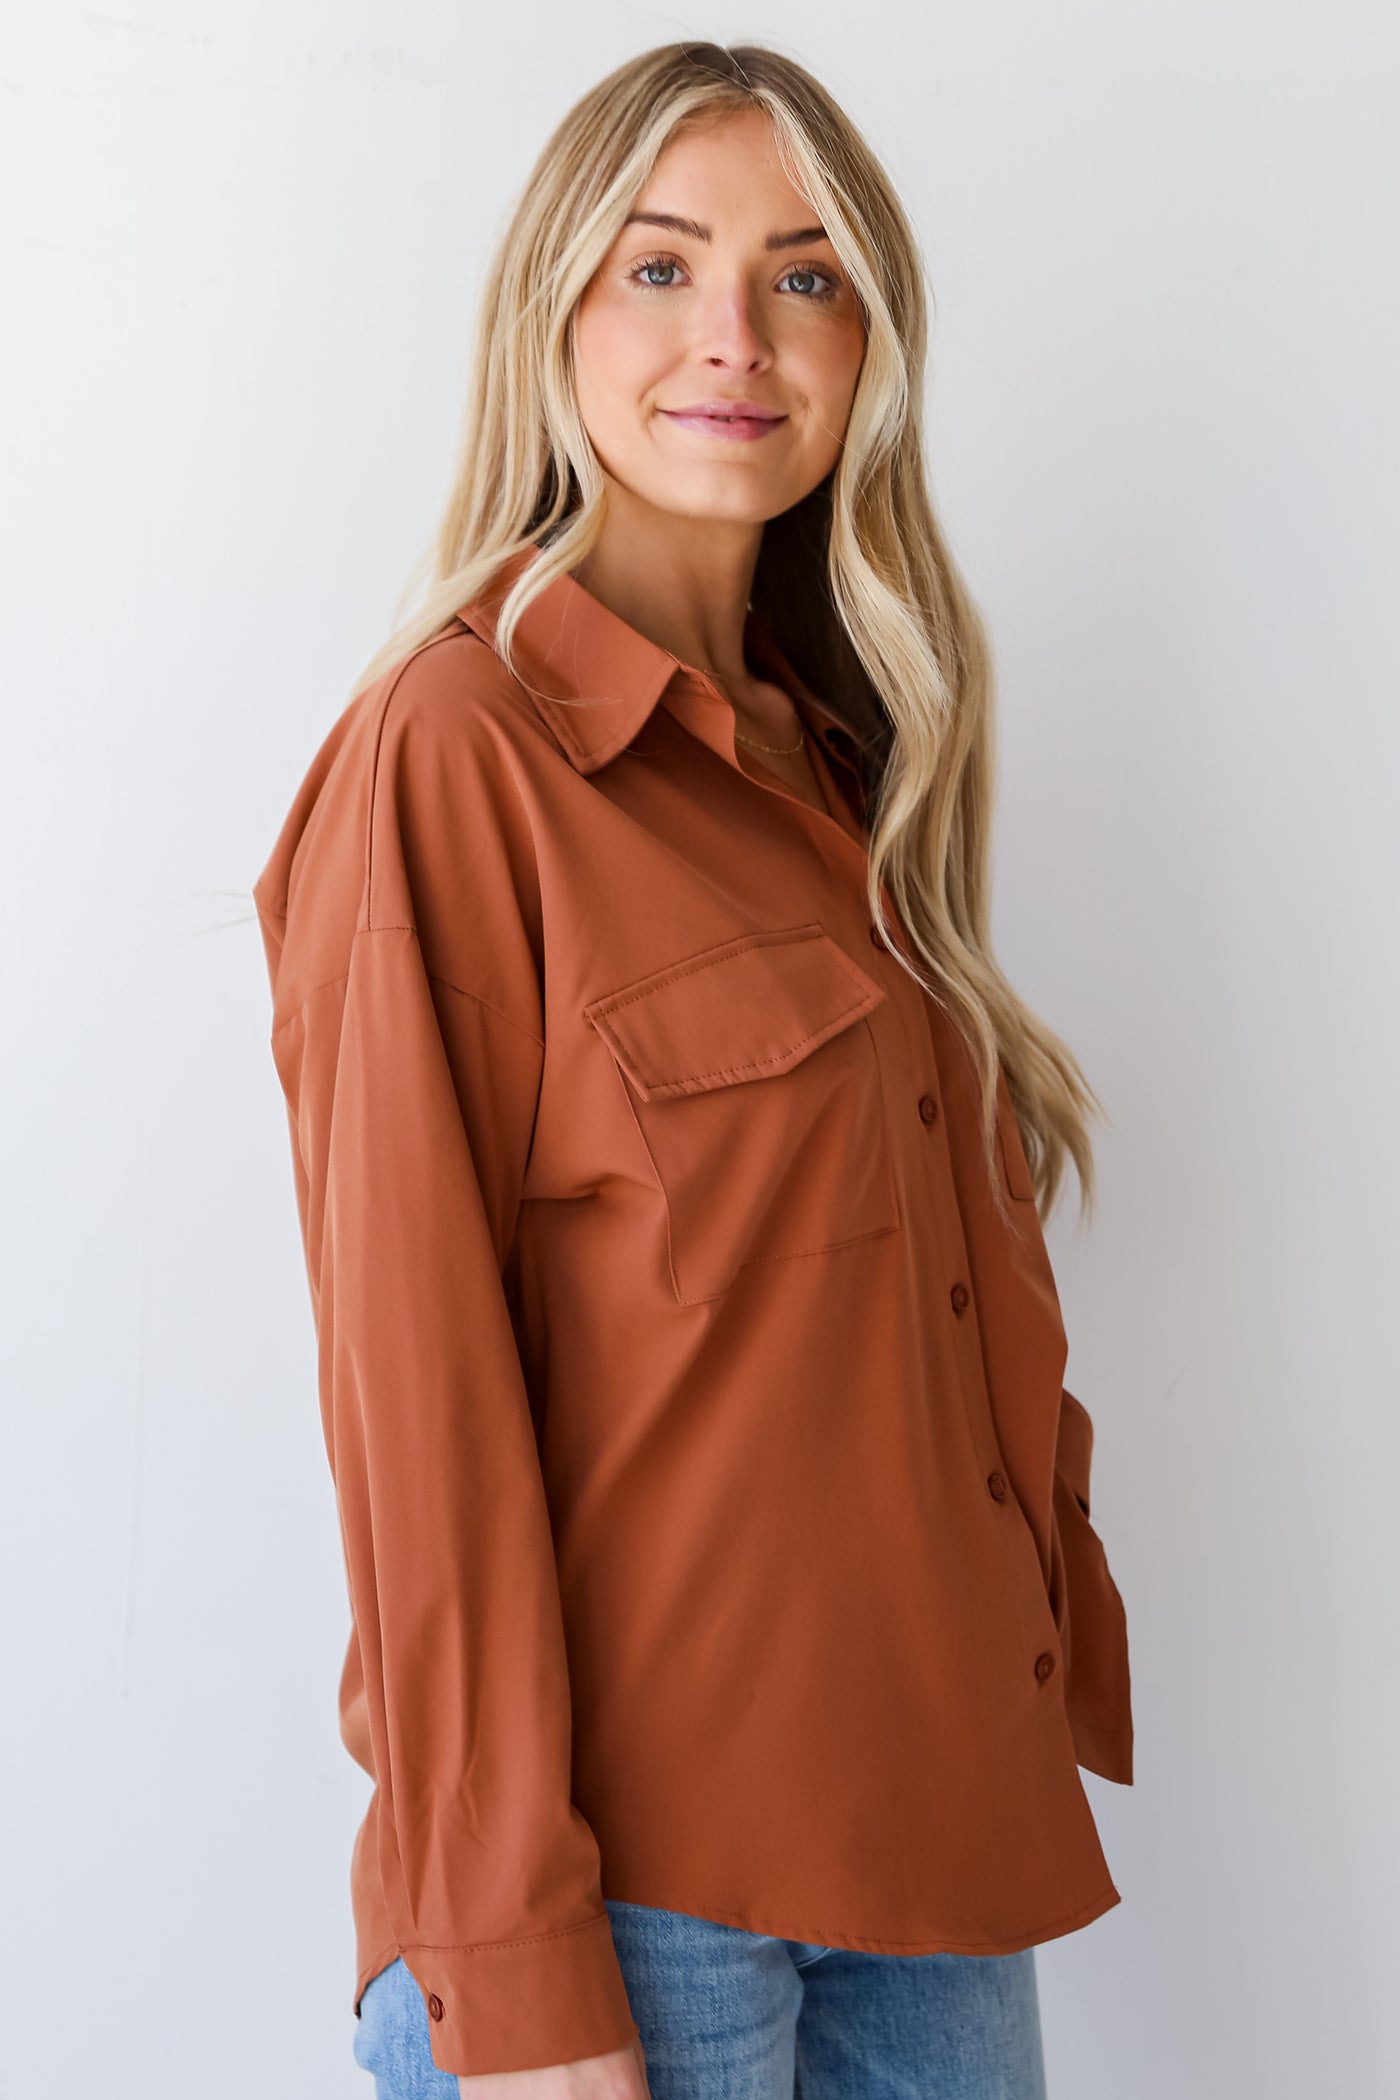 classic brown Button-Up Blouse